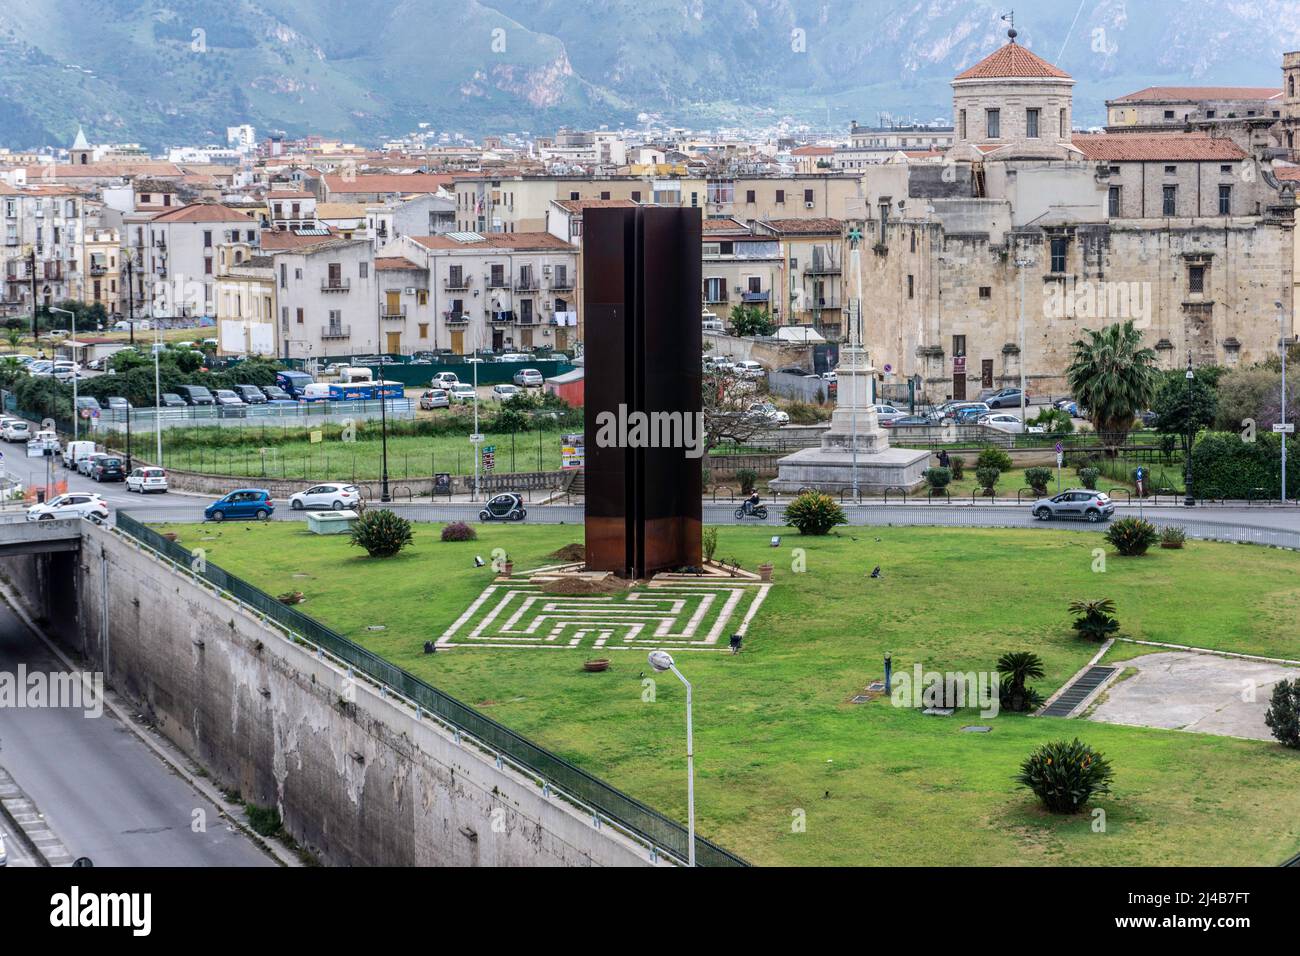 The monument to the victims of the struggle against the Mafia in Piazza XIII Vittime, Palermo, Sicily, Italy. Designed by the sculptor,Mario Pecoraino Stock Photo